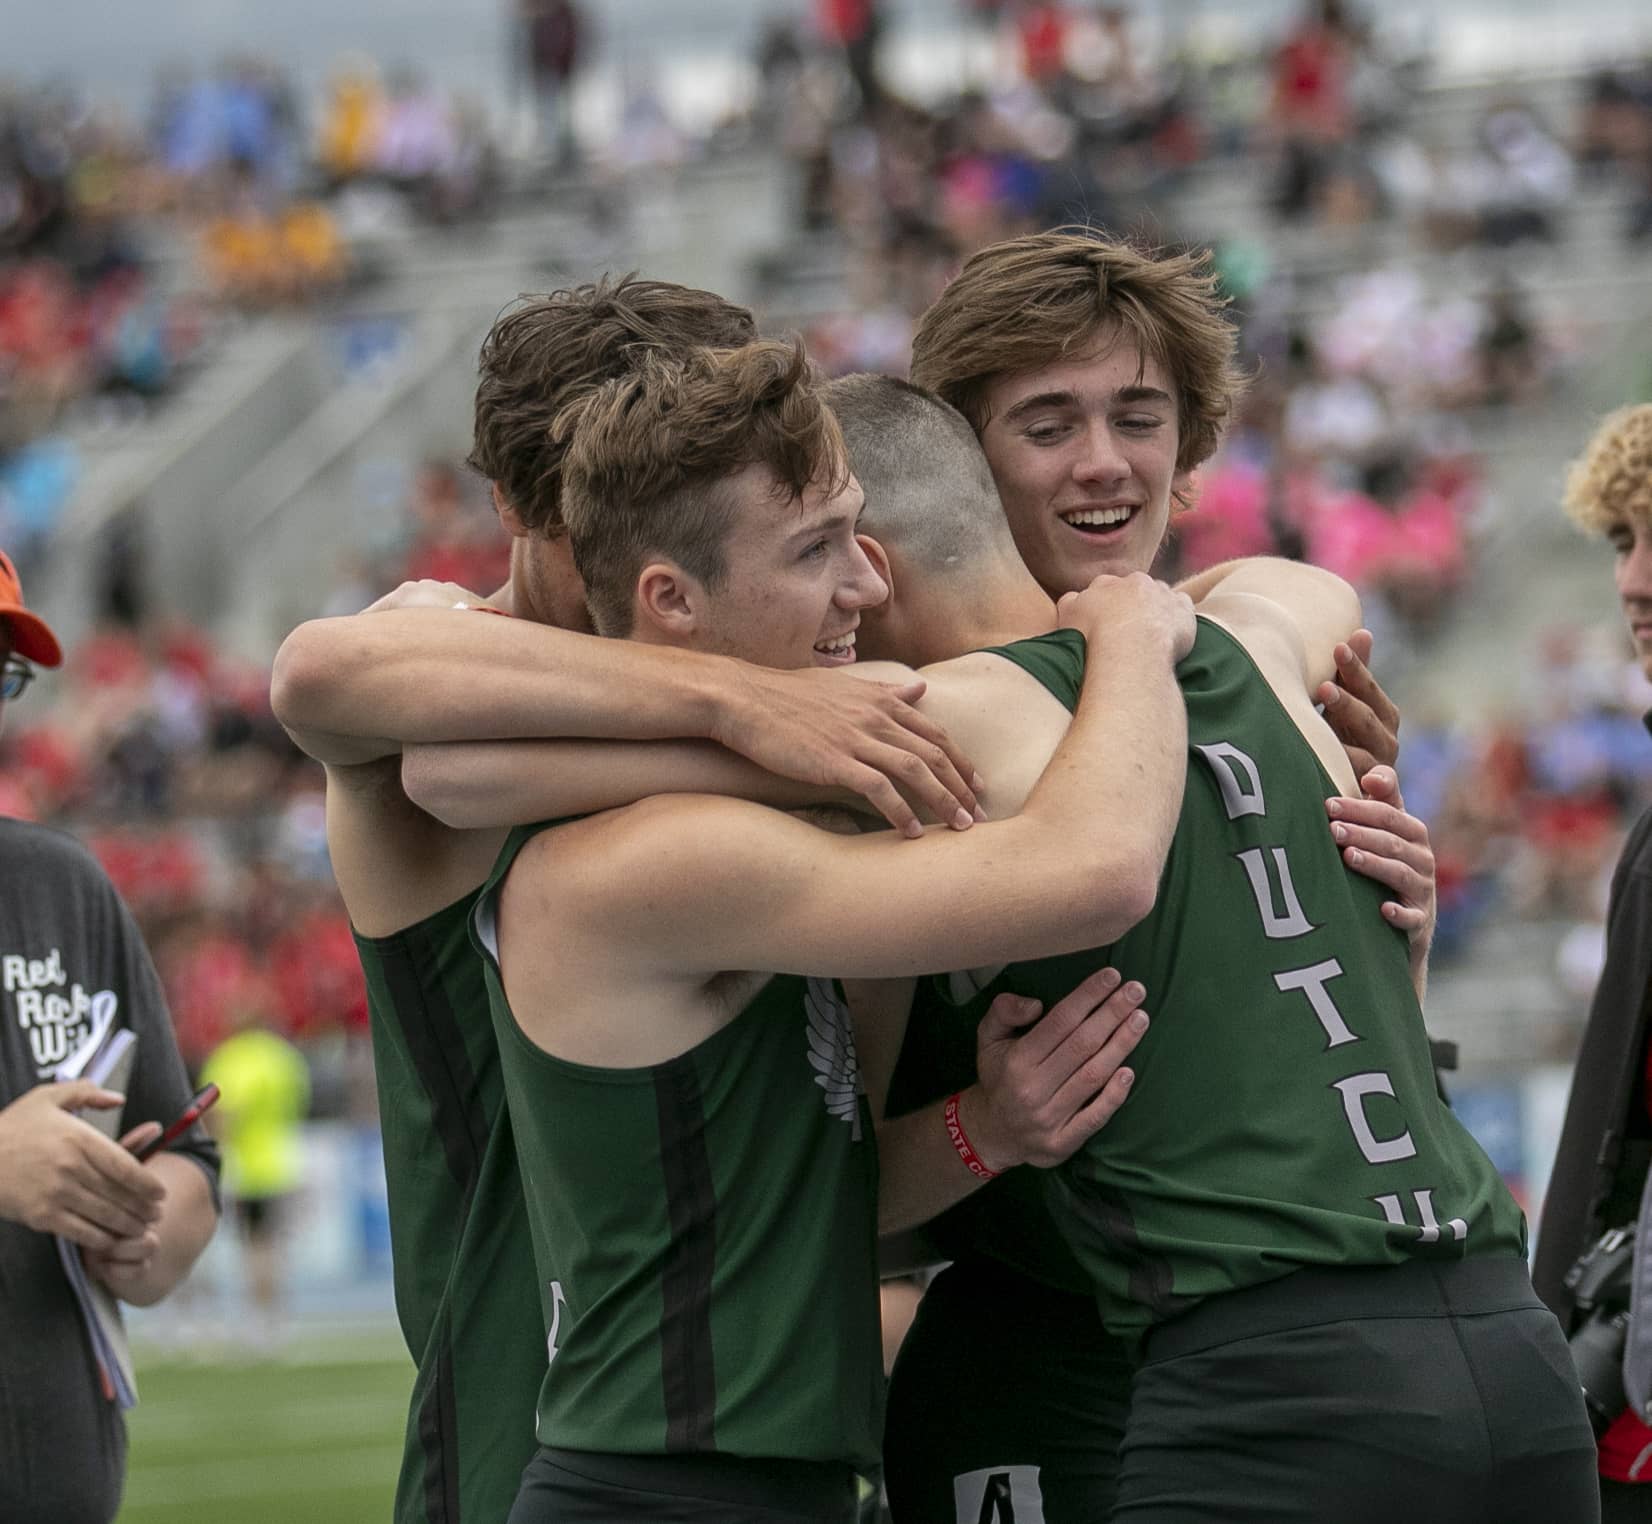 State Track and Field 2021 – Friday Schedule/Results | KNIA KRLS Radio